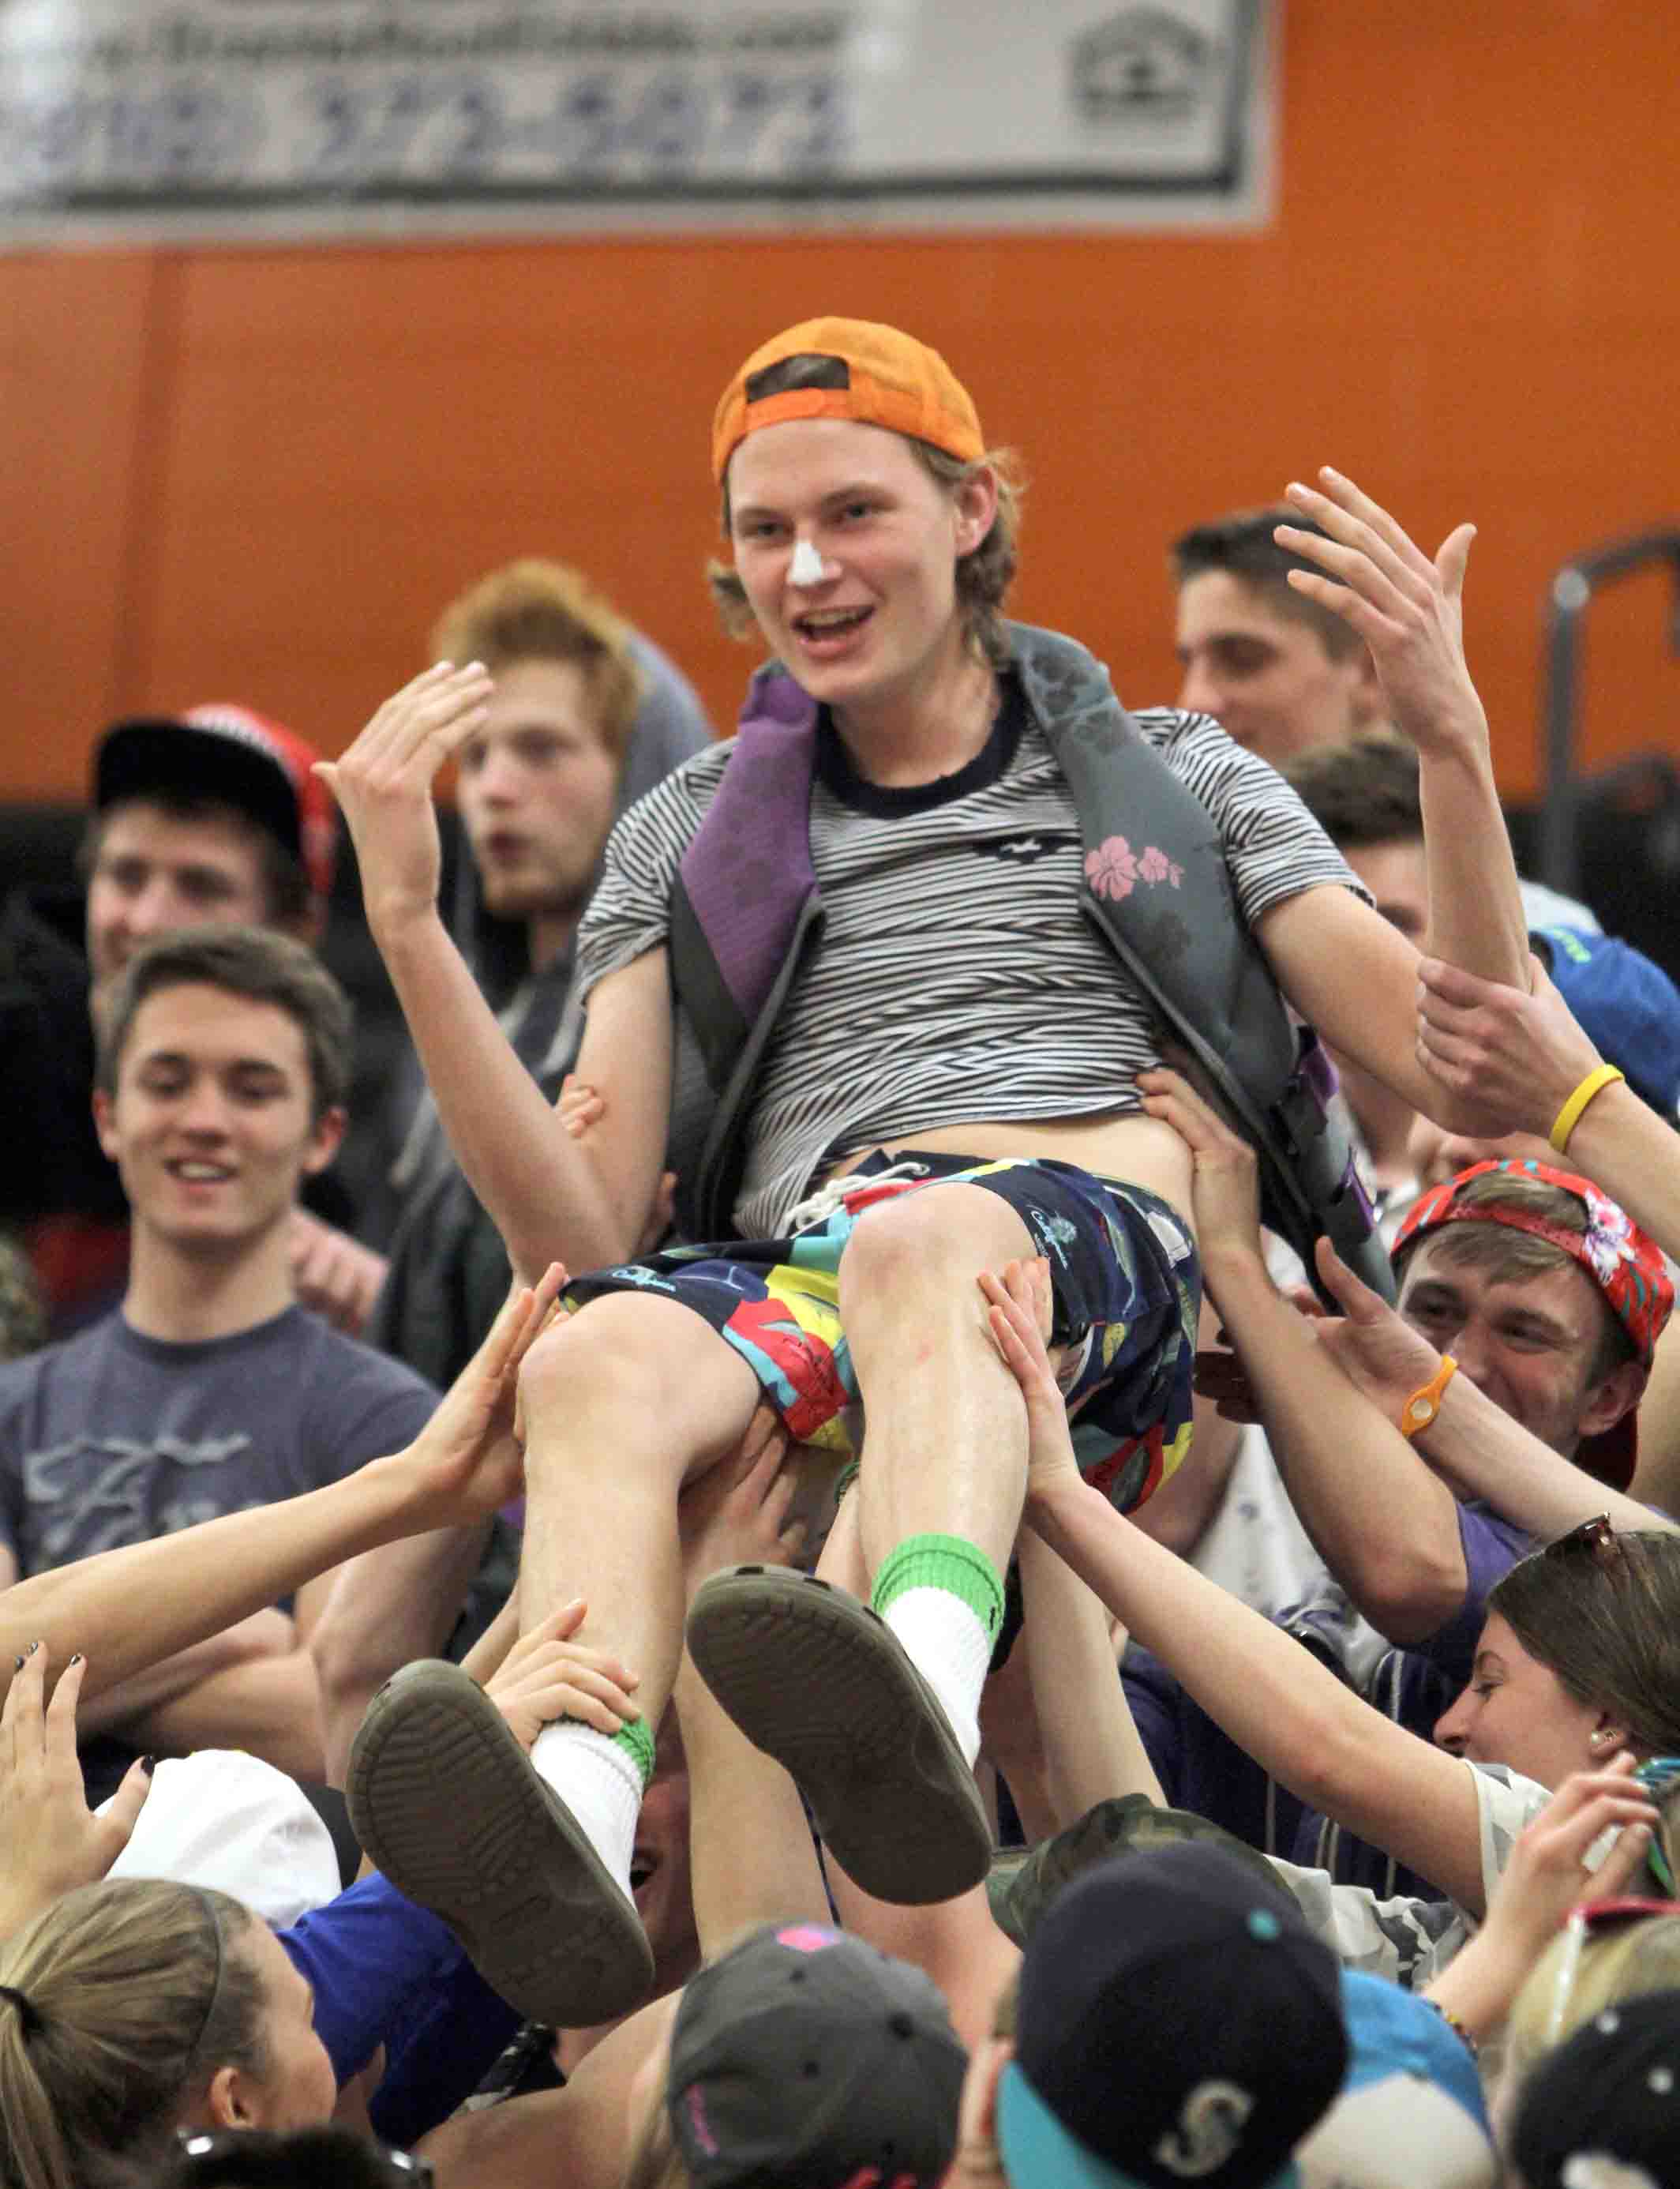 Surfs Up. Crowd surfing through the senior side of the student section during halftime of the boys basketball game against Lapeer East on Jan. 24, senior Alex Fulton is carried upward over the crowd. “I started crowd surfing over the seniors because we had to show up the juniors,” Fulton said. “The theme that night was beach night and this game was the most fun because of the huge crowd we had.” 